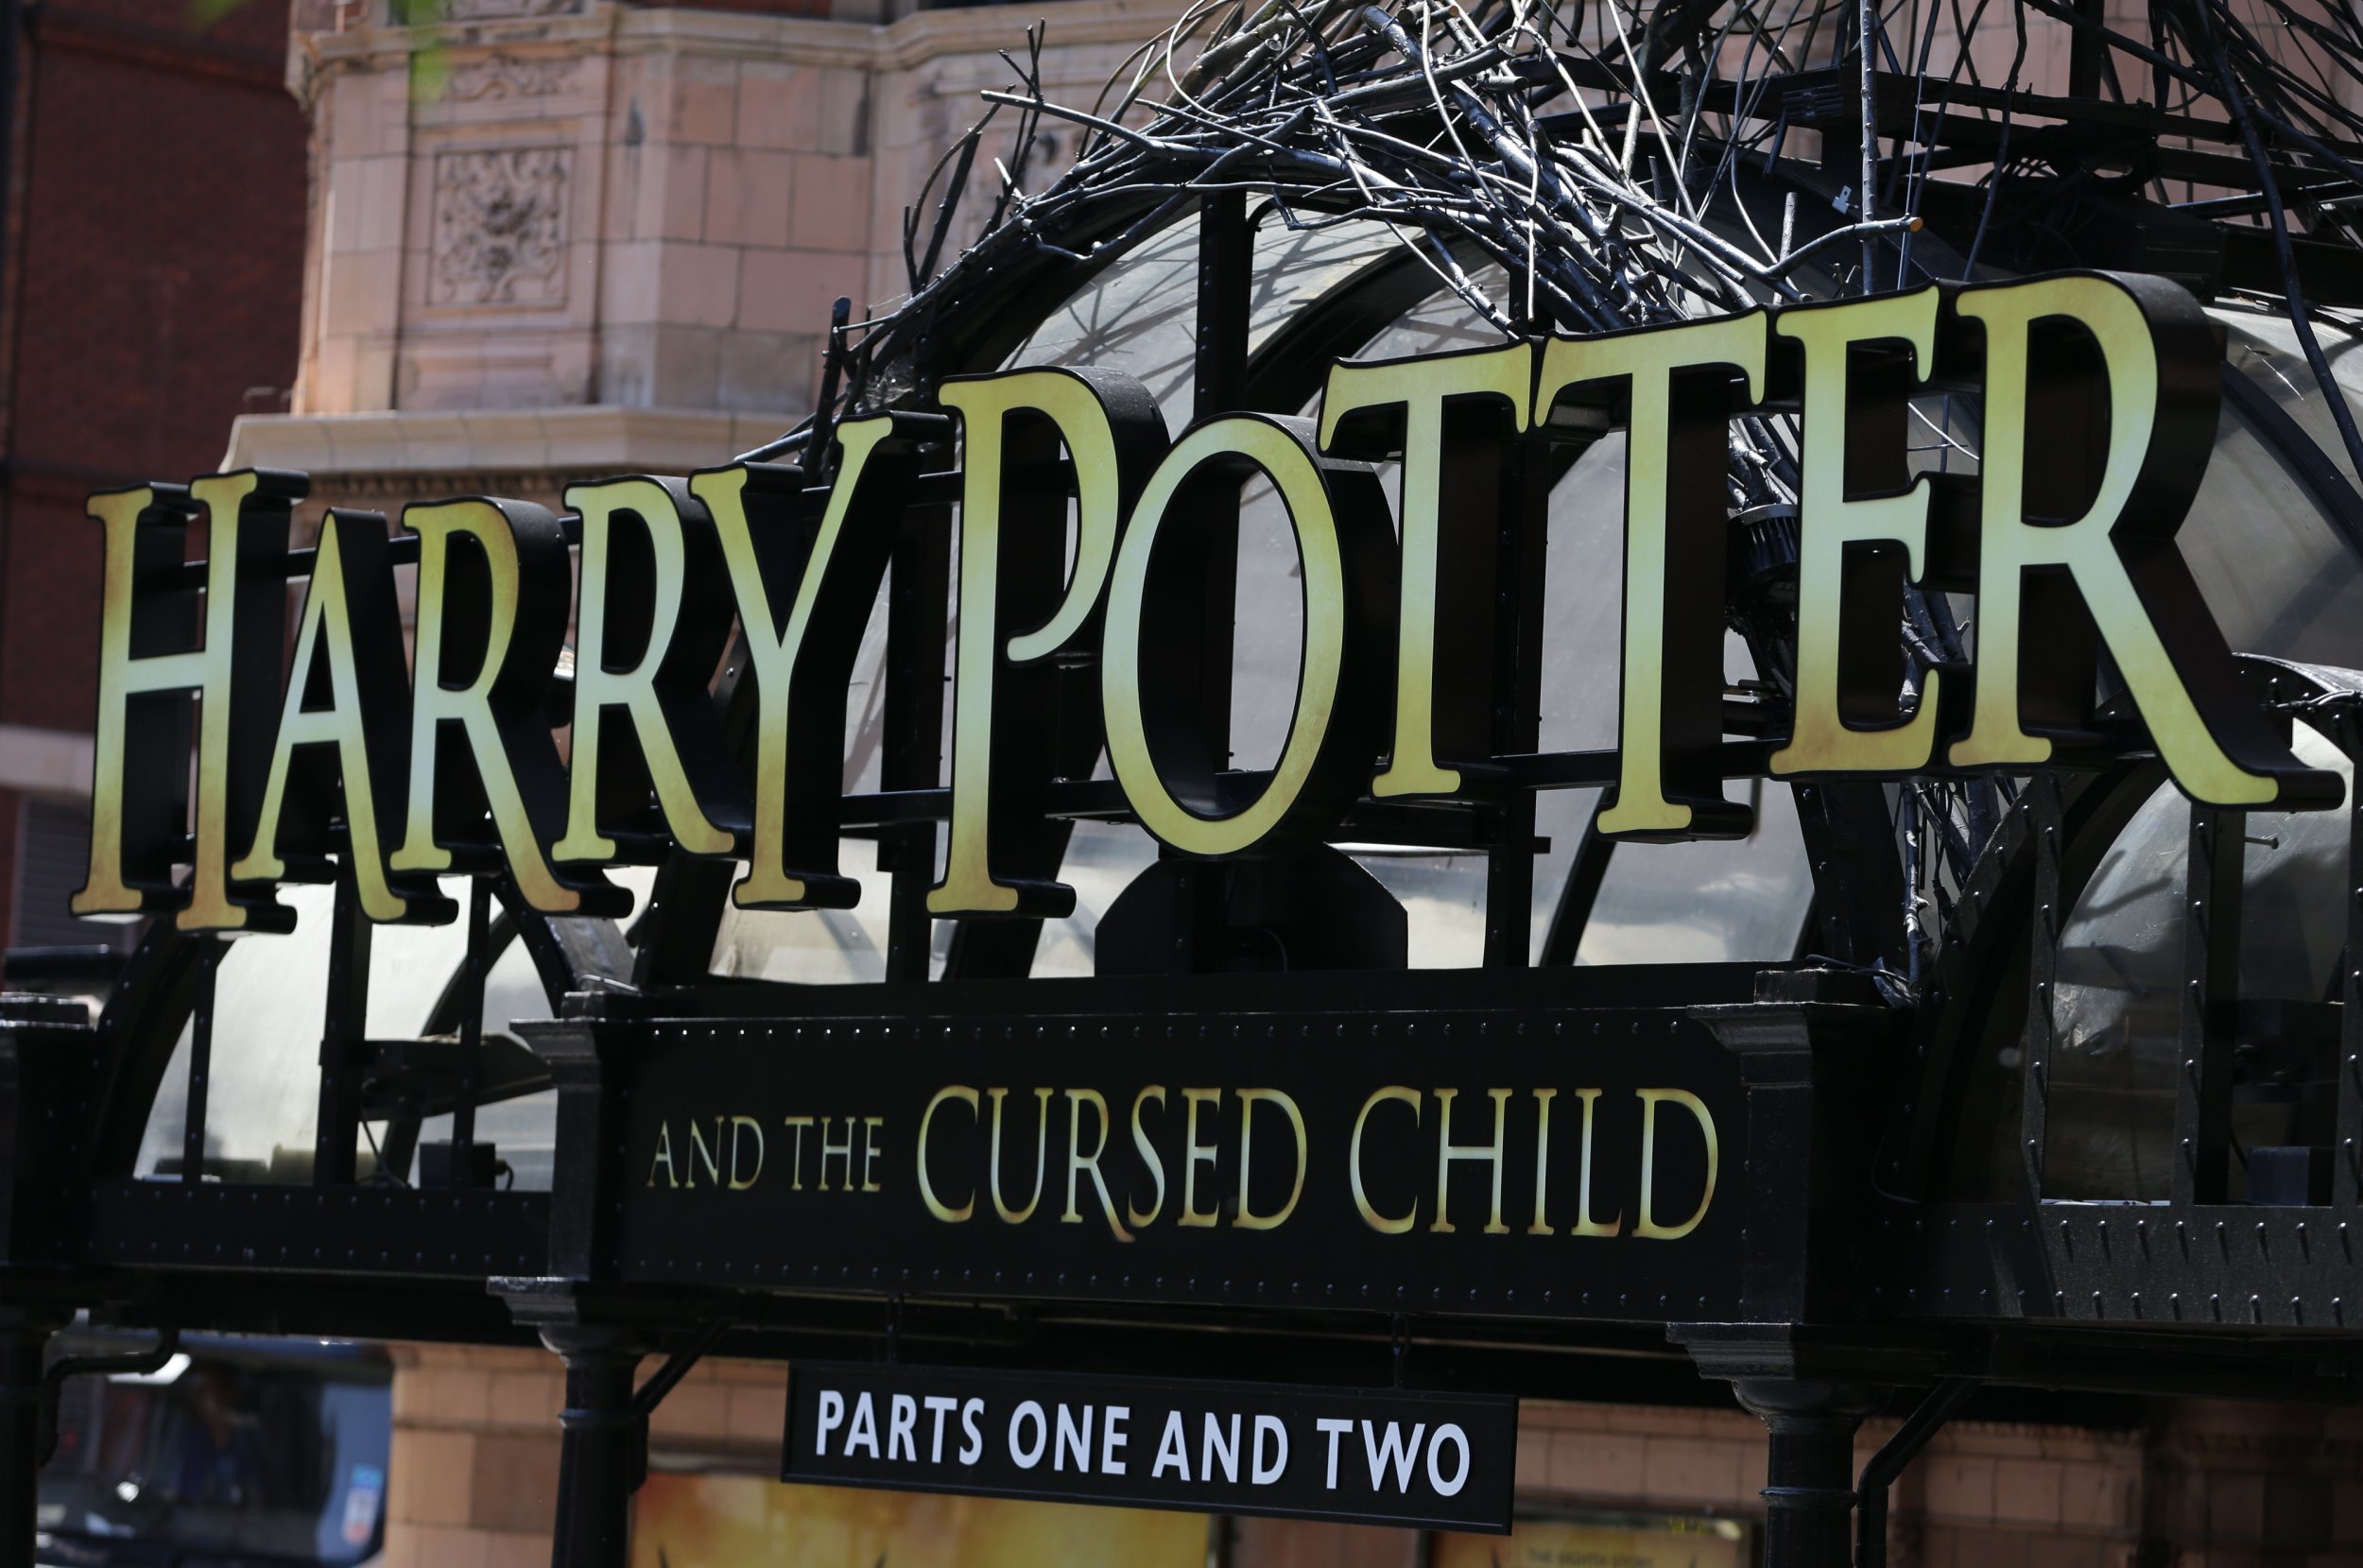 Harry Potter and the Cursed Child play